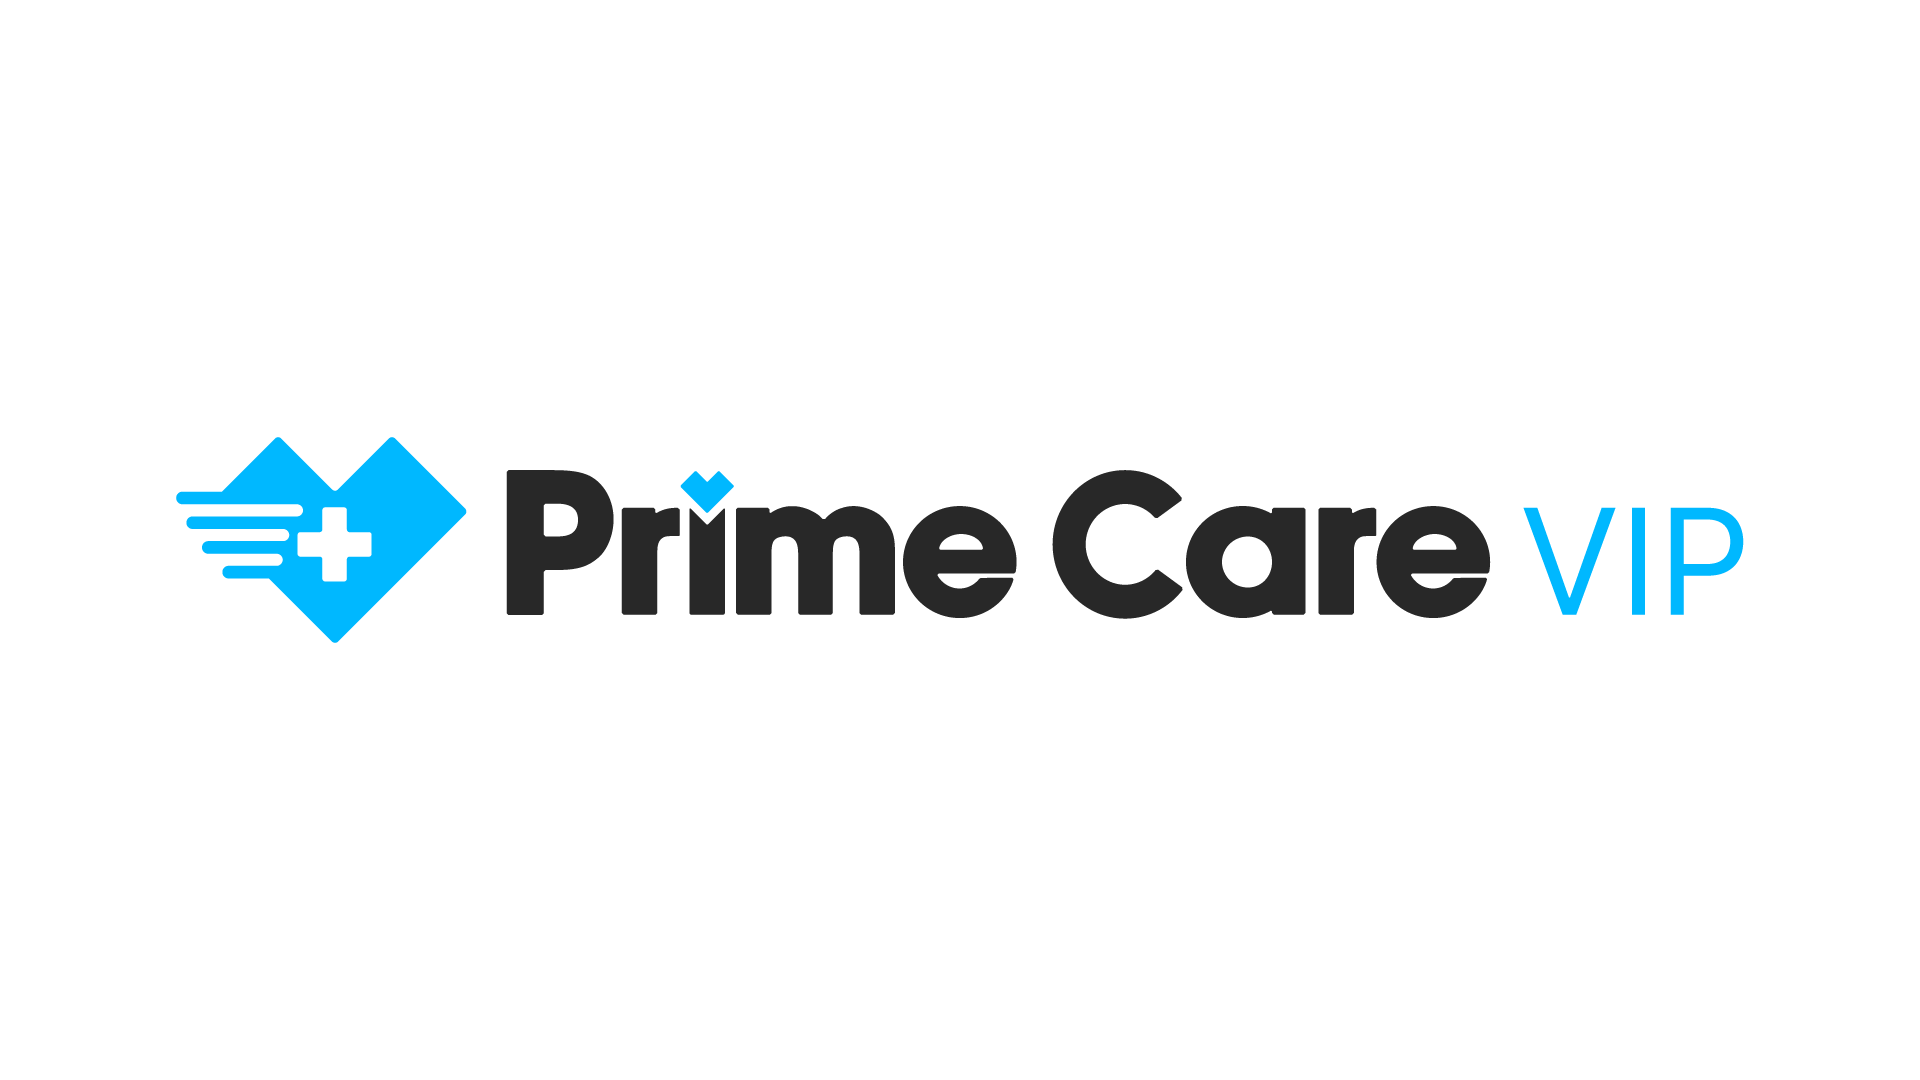 Prime Care VIP: NP2ME Unveils New Brand Name and Reinforces Commitment to Affordable Mobile Concierge Primary Medical Care